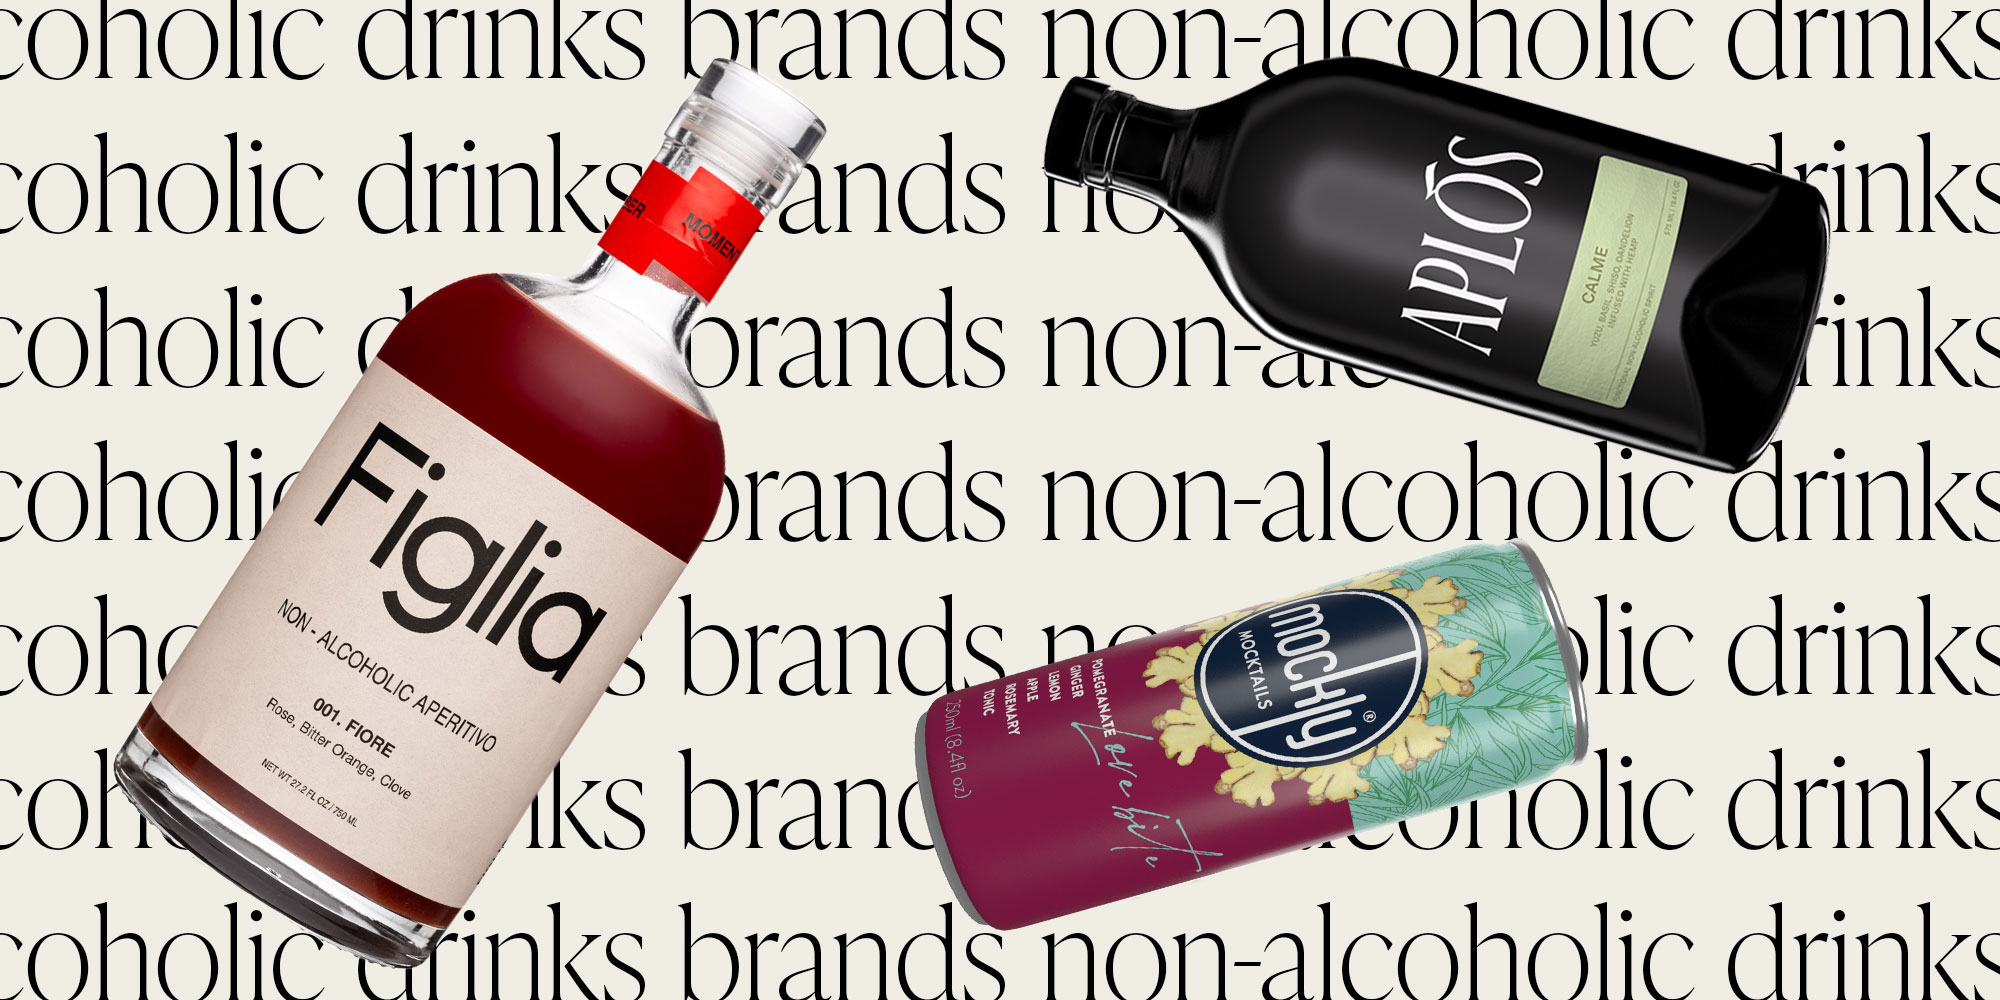 The 20 Best Non-Alcoholic Drinks Brands (2023)